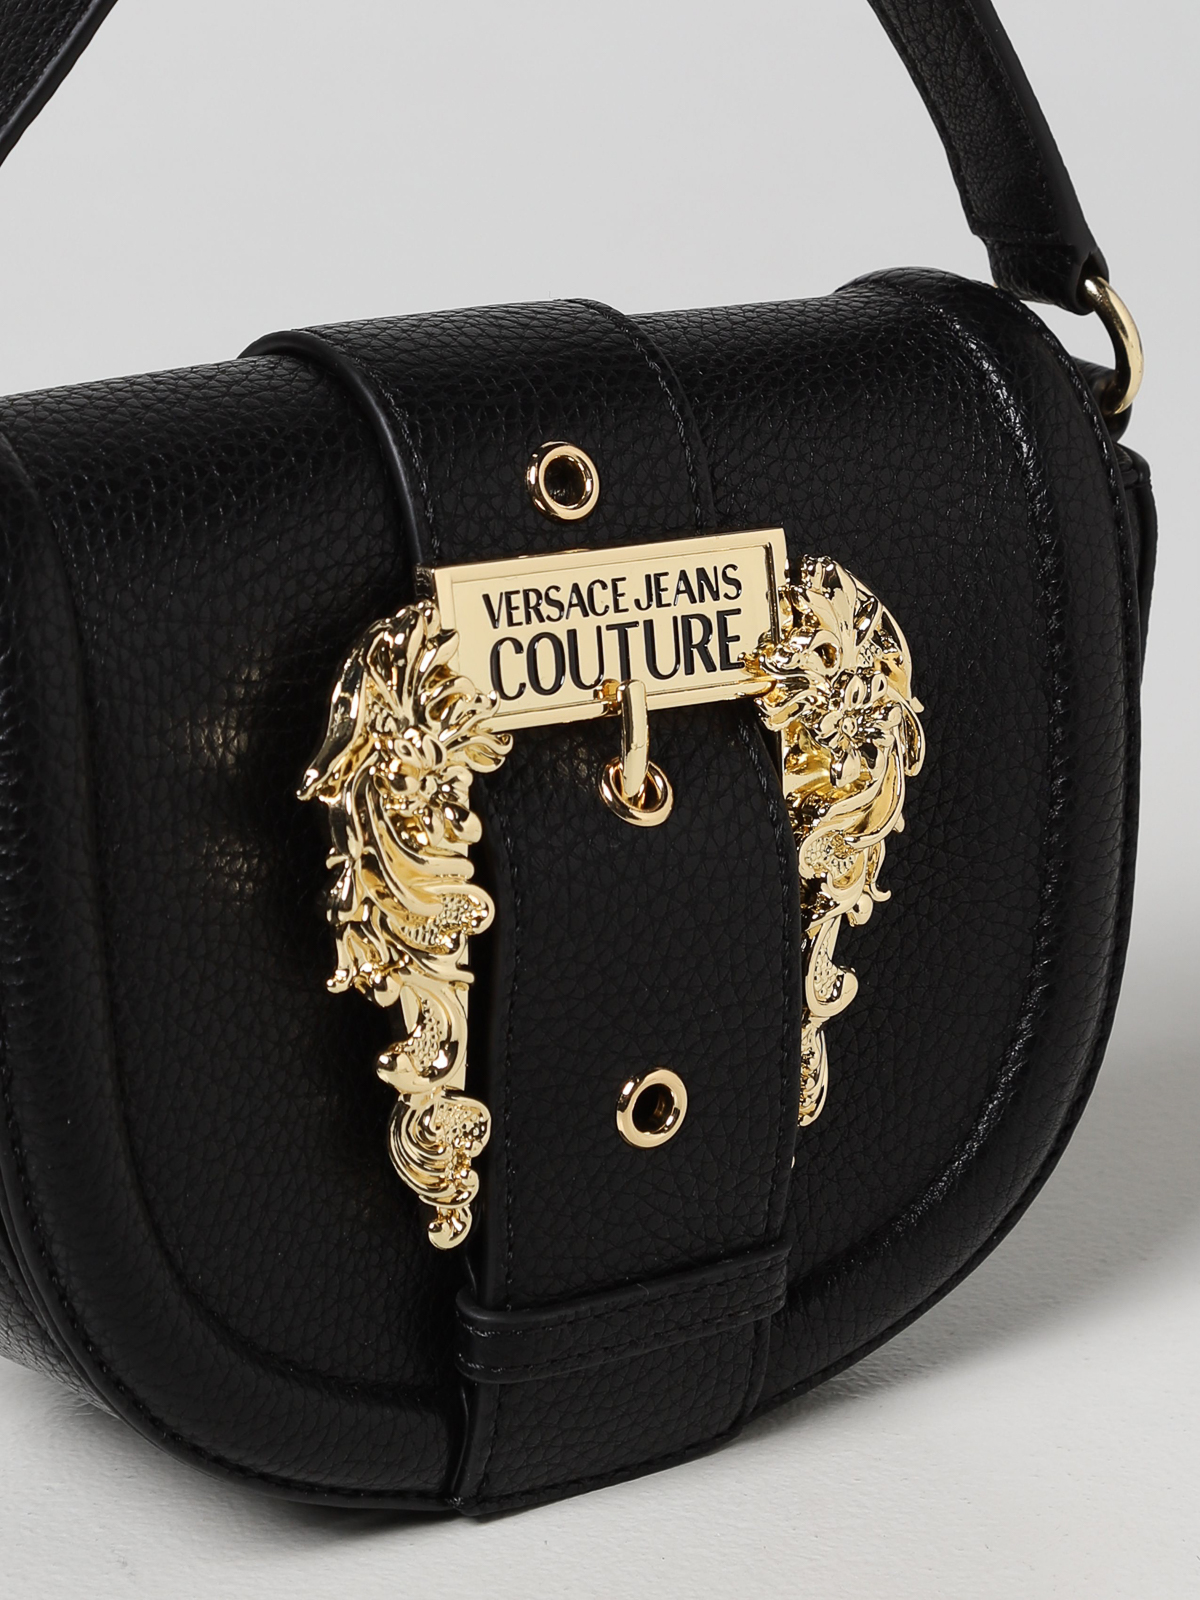 Versace Jeans Couture Black Structured Baroque Belt Crossbody